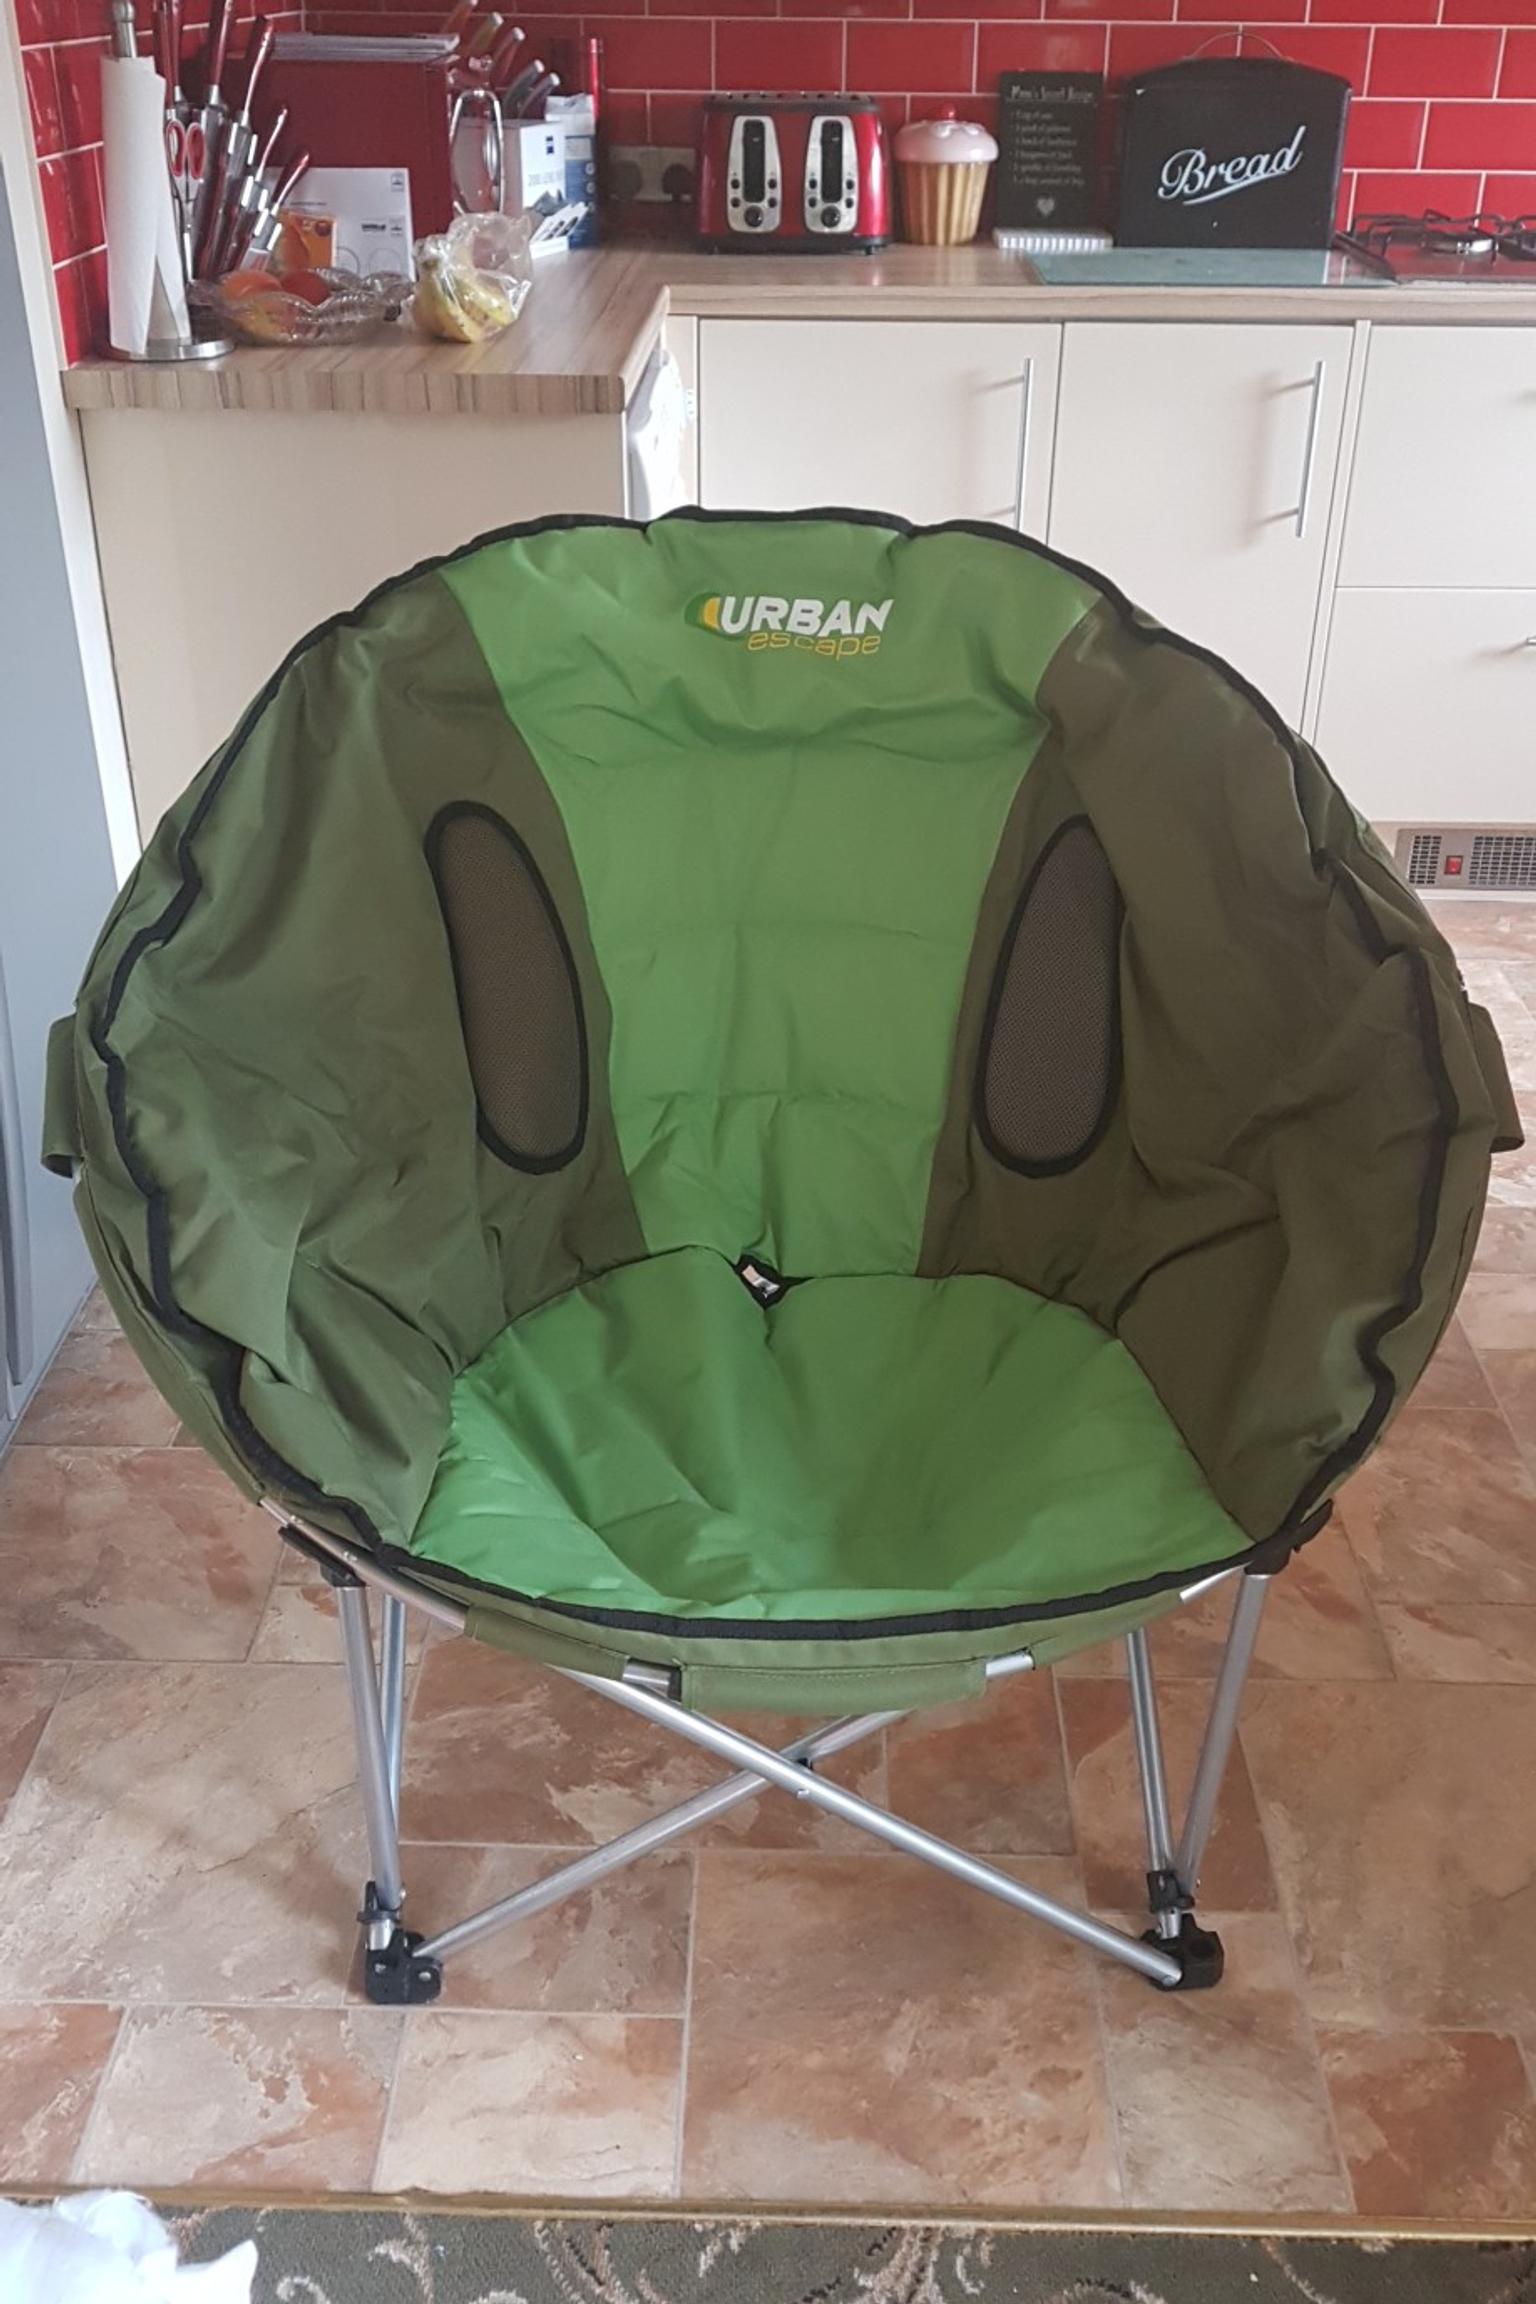 2 chairs Urban escape camping moon chair in HP1 Hempstead for £40.00